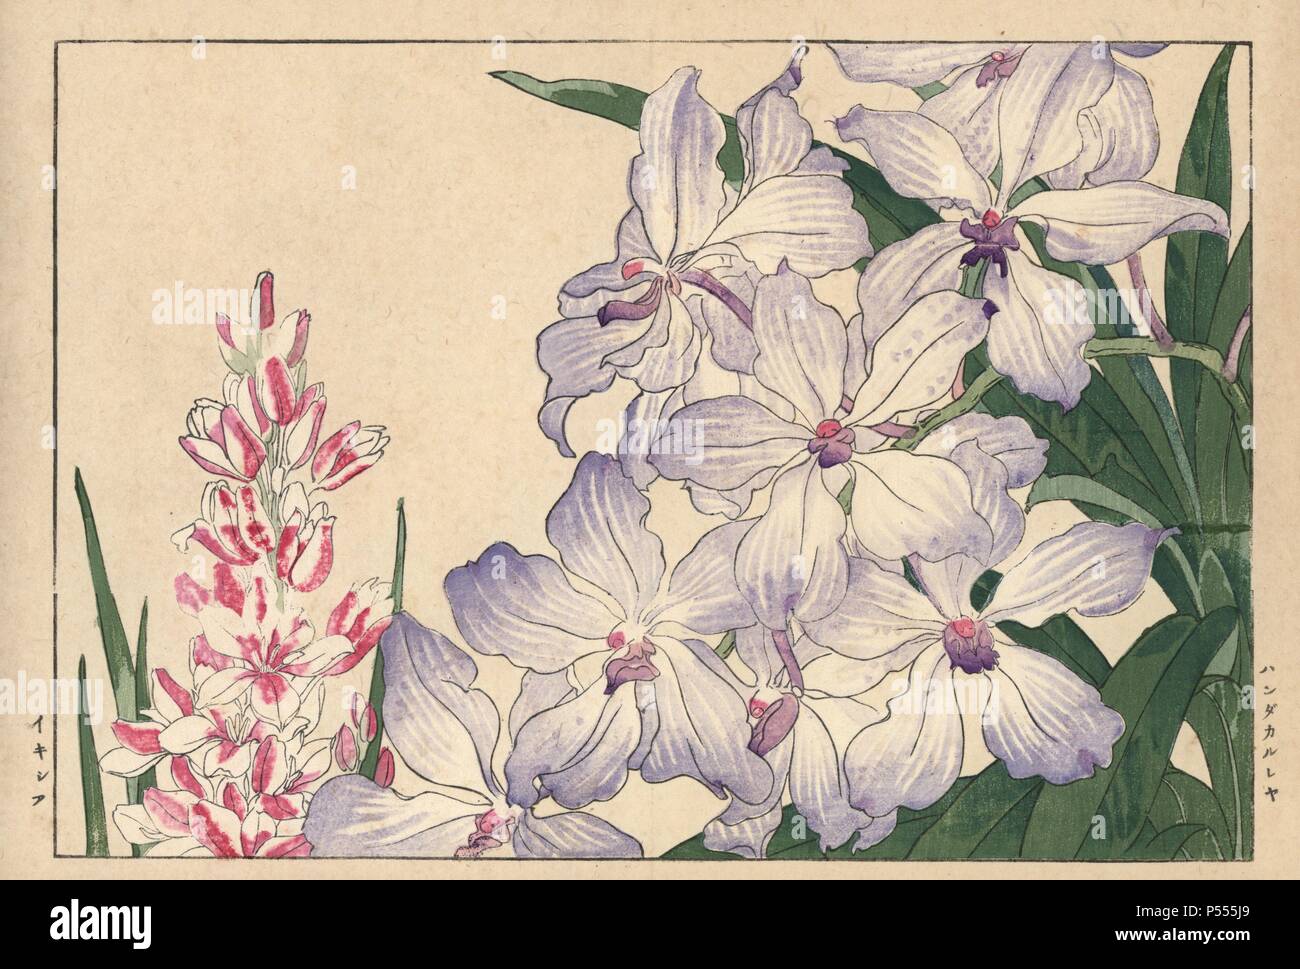 Vanda cattleya orchid and ixia. Handcoloured woodblock print from Konan Tanigami's 'Seiyou Sokazufu' (Pictorial Album of Western Plants and Flowers: Spring), Unsodo, Kyoto, 1917. Tanigami (1879-1928) depicted 125 varieties of garden plants through the four seasons. Stock Photo